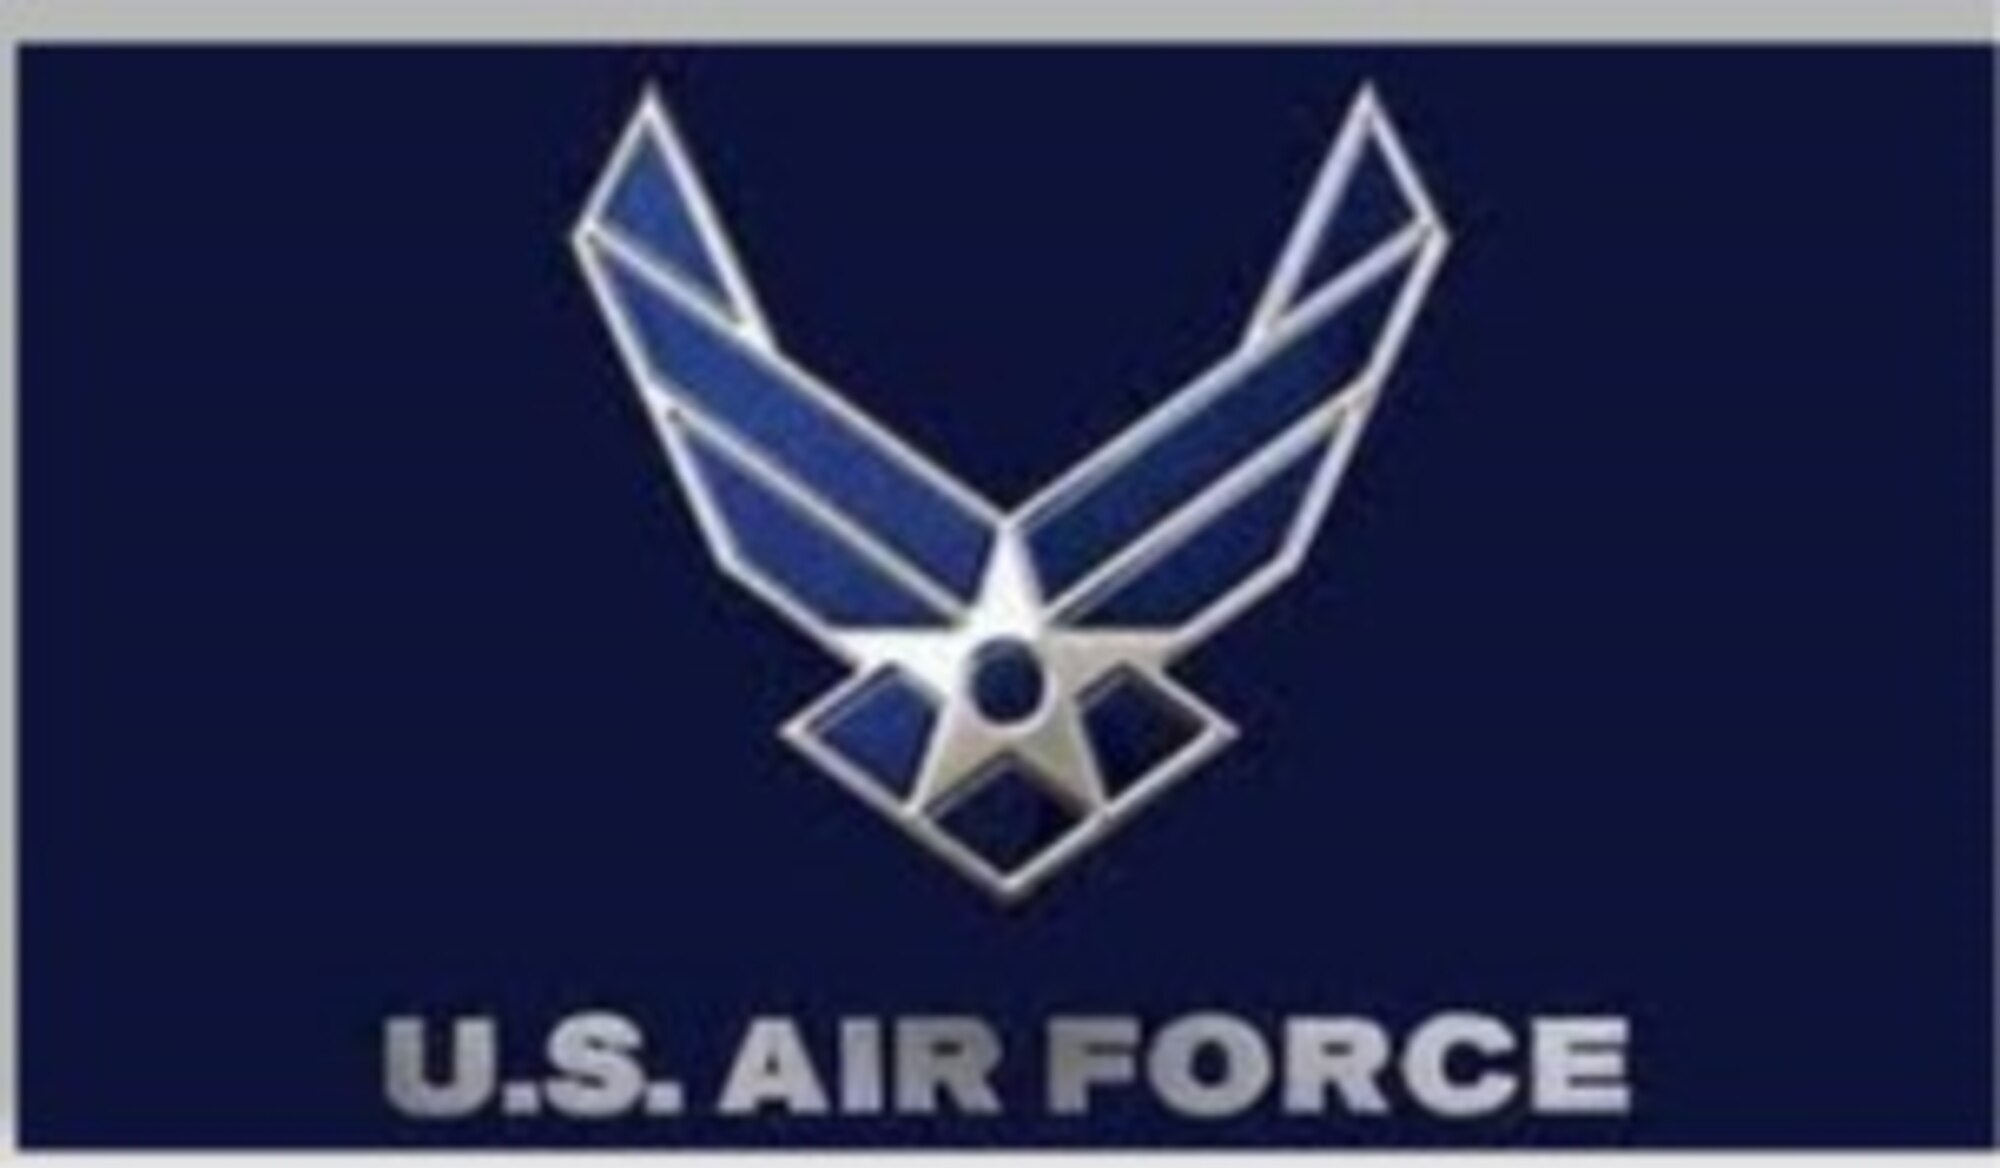 The Air Force announced plans today to bring four new missions, including new aircraft, to Robins Air Force Base, Georgia, beginning in fiscal year 2022.